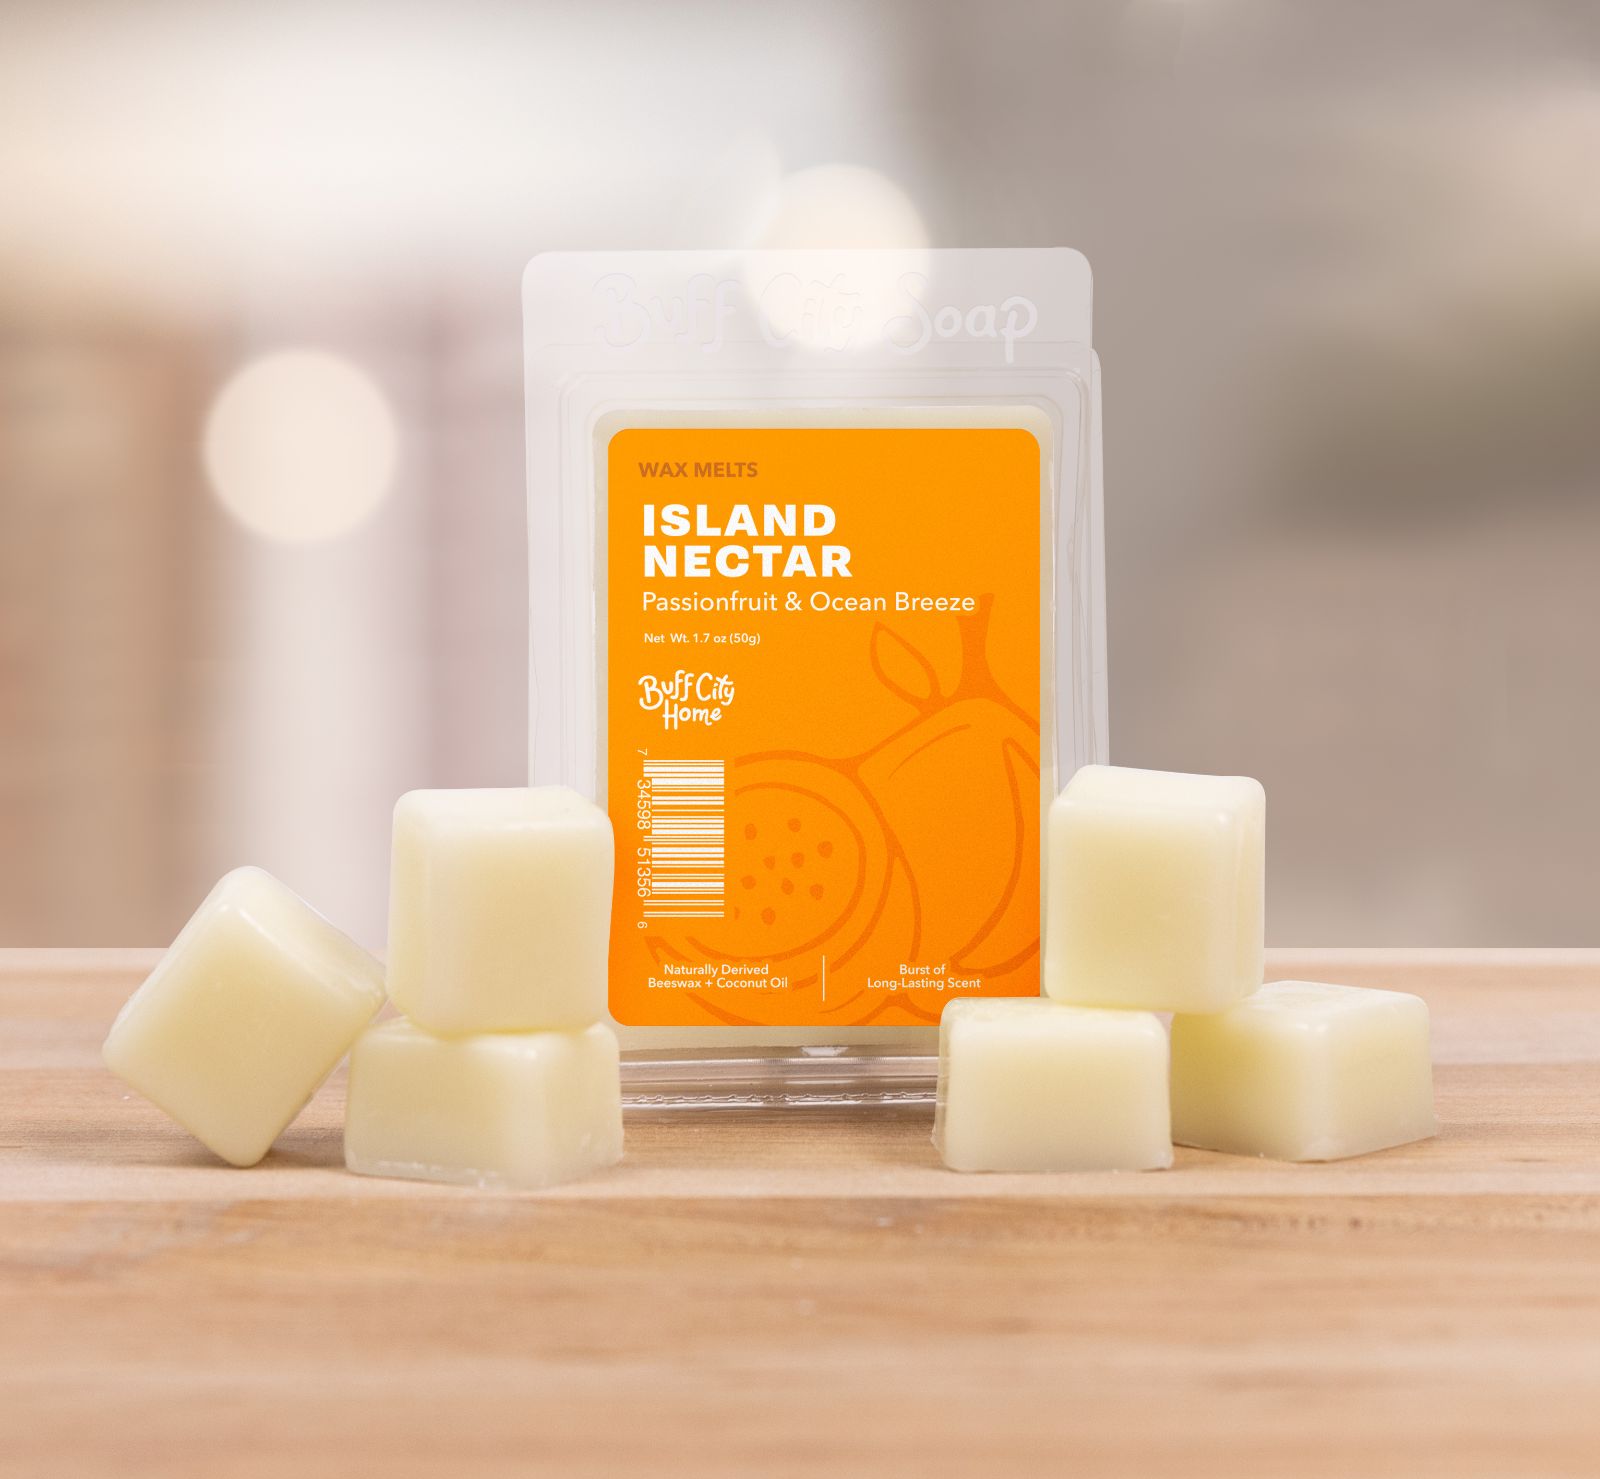 Buff City Soap square Island Nectar Wax Melts staggered in front of container 